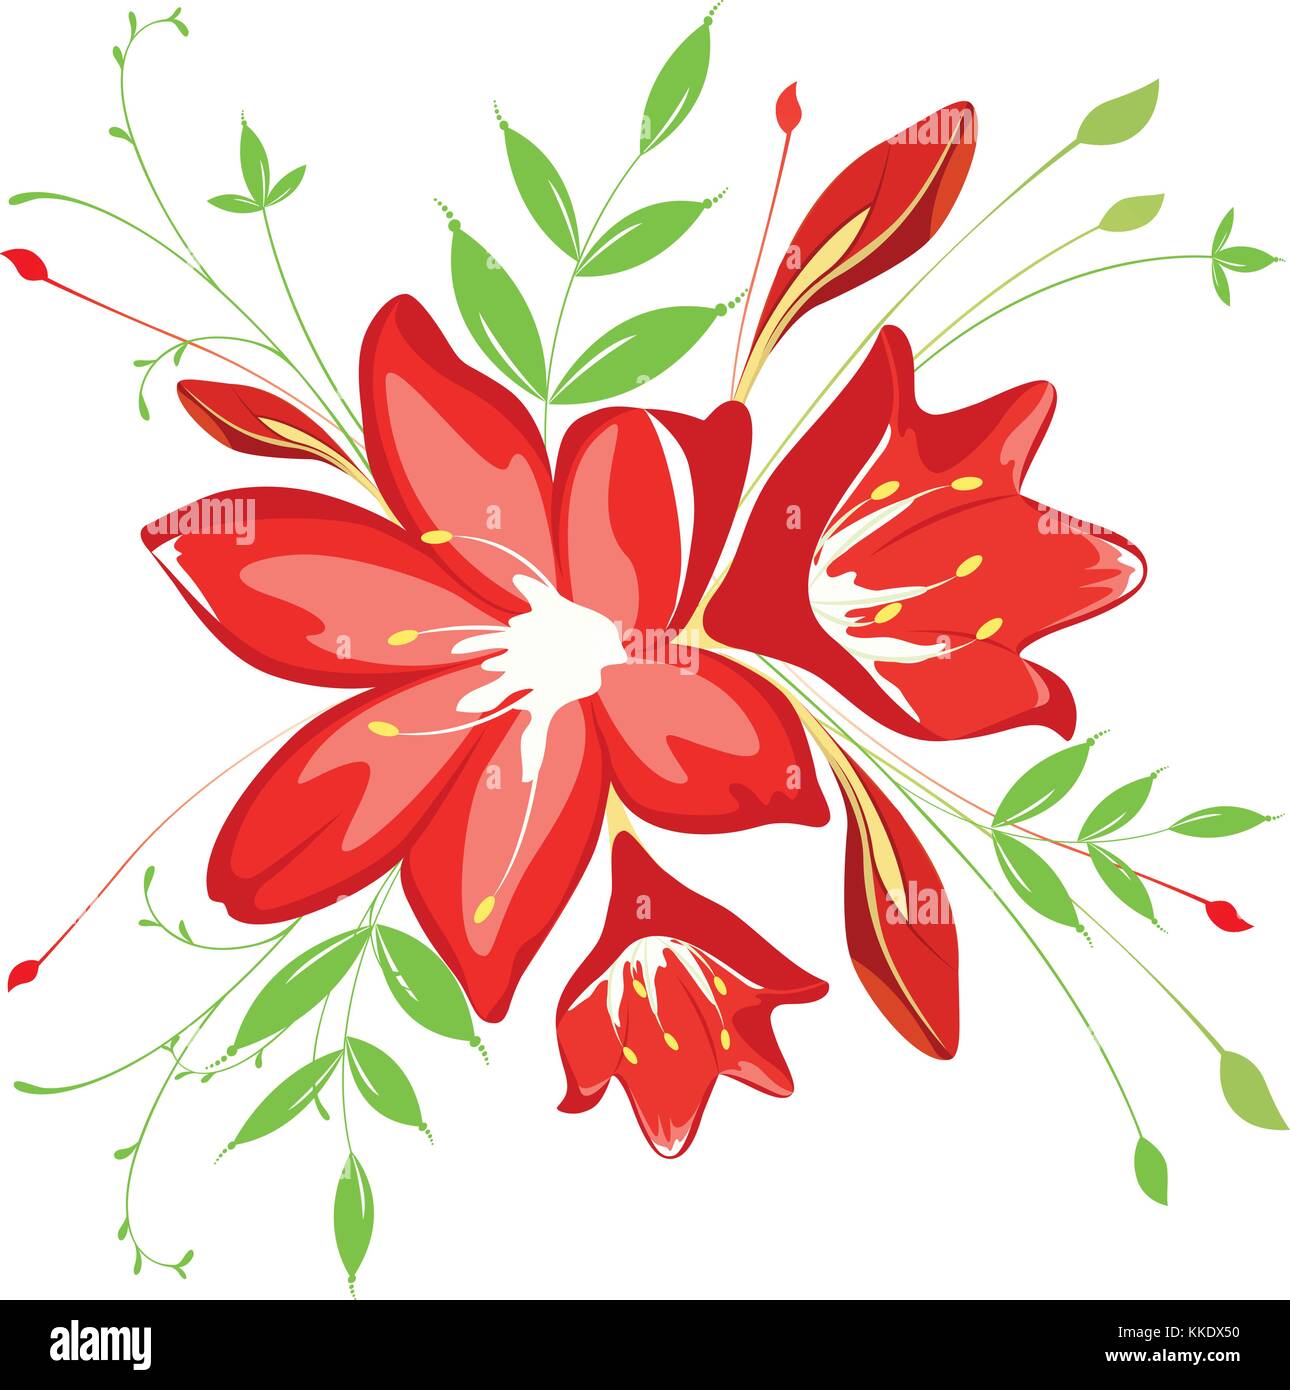 bouquet  flowers and greenery, vector illustration Stock Vector